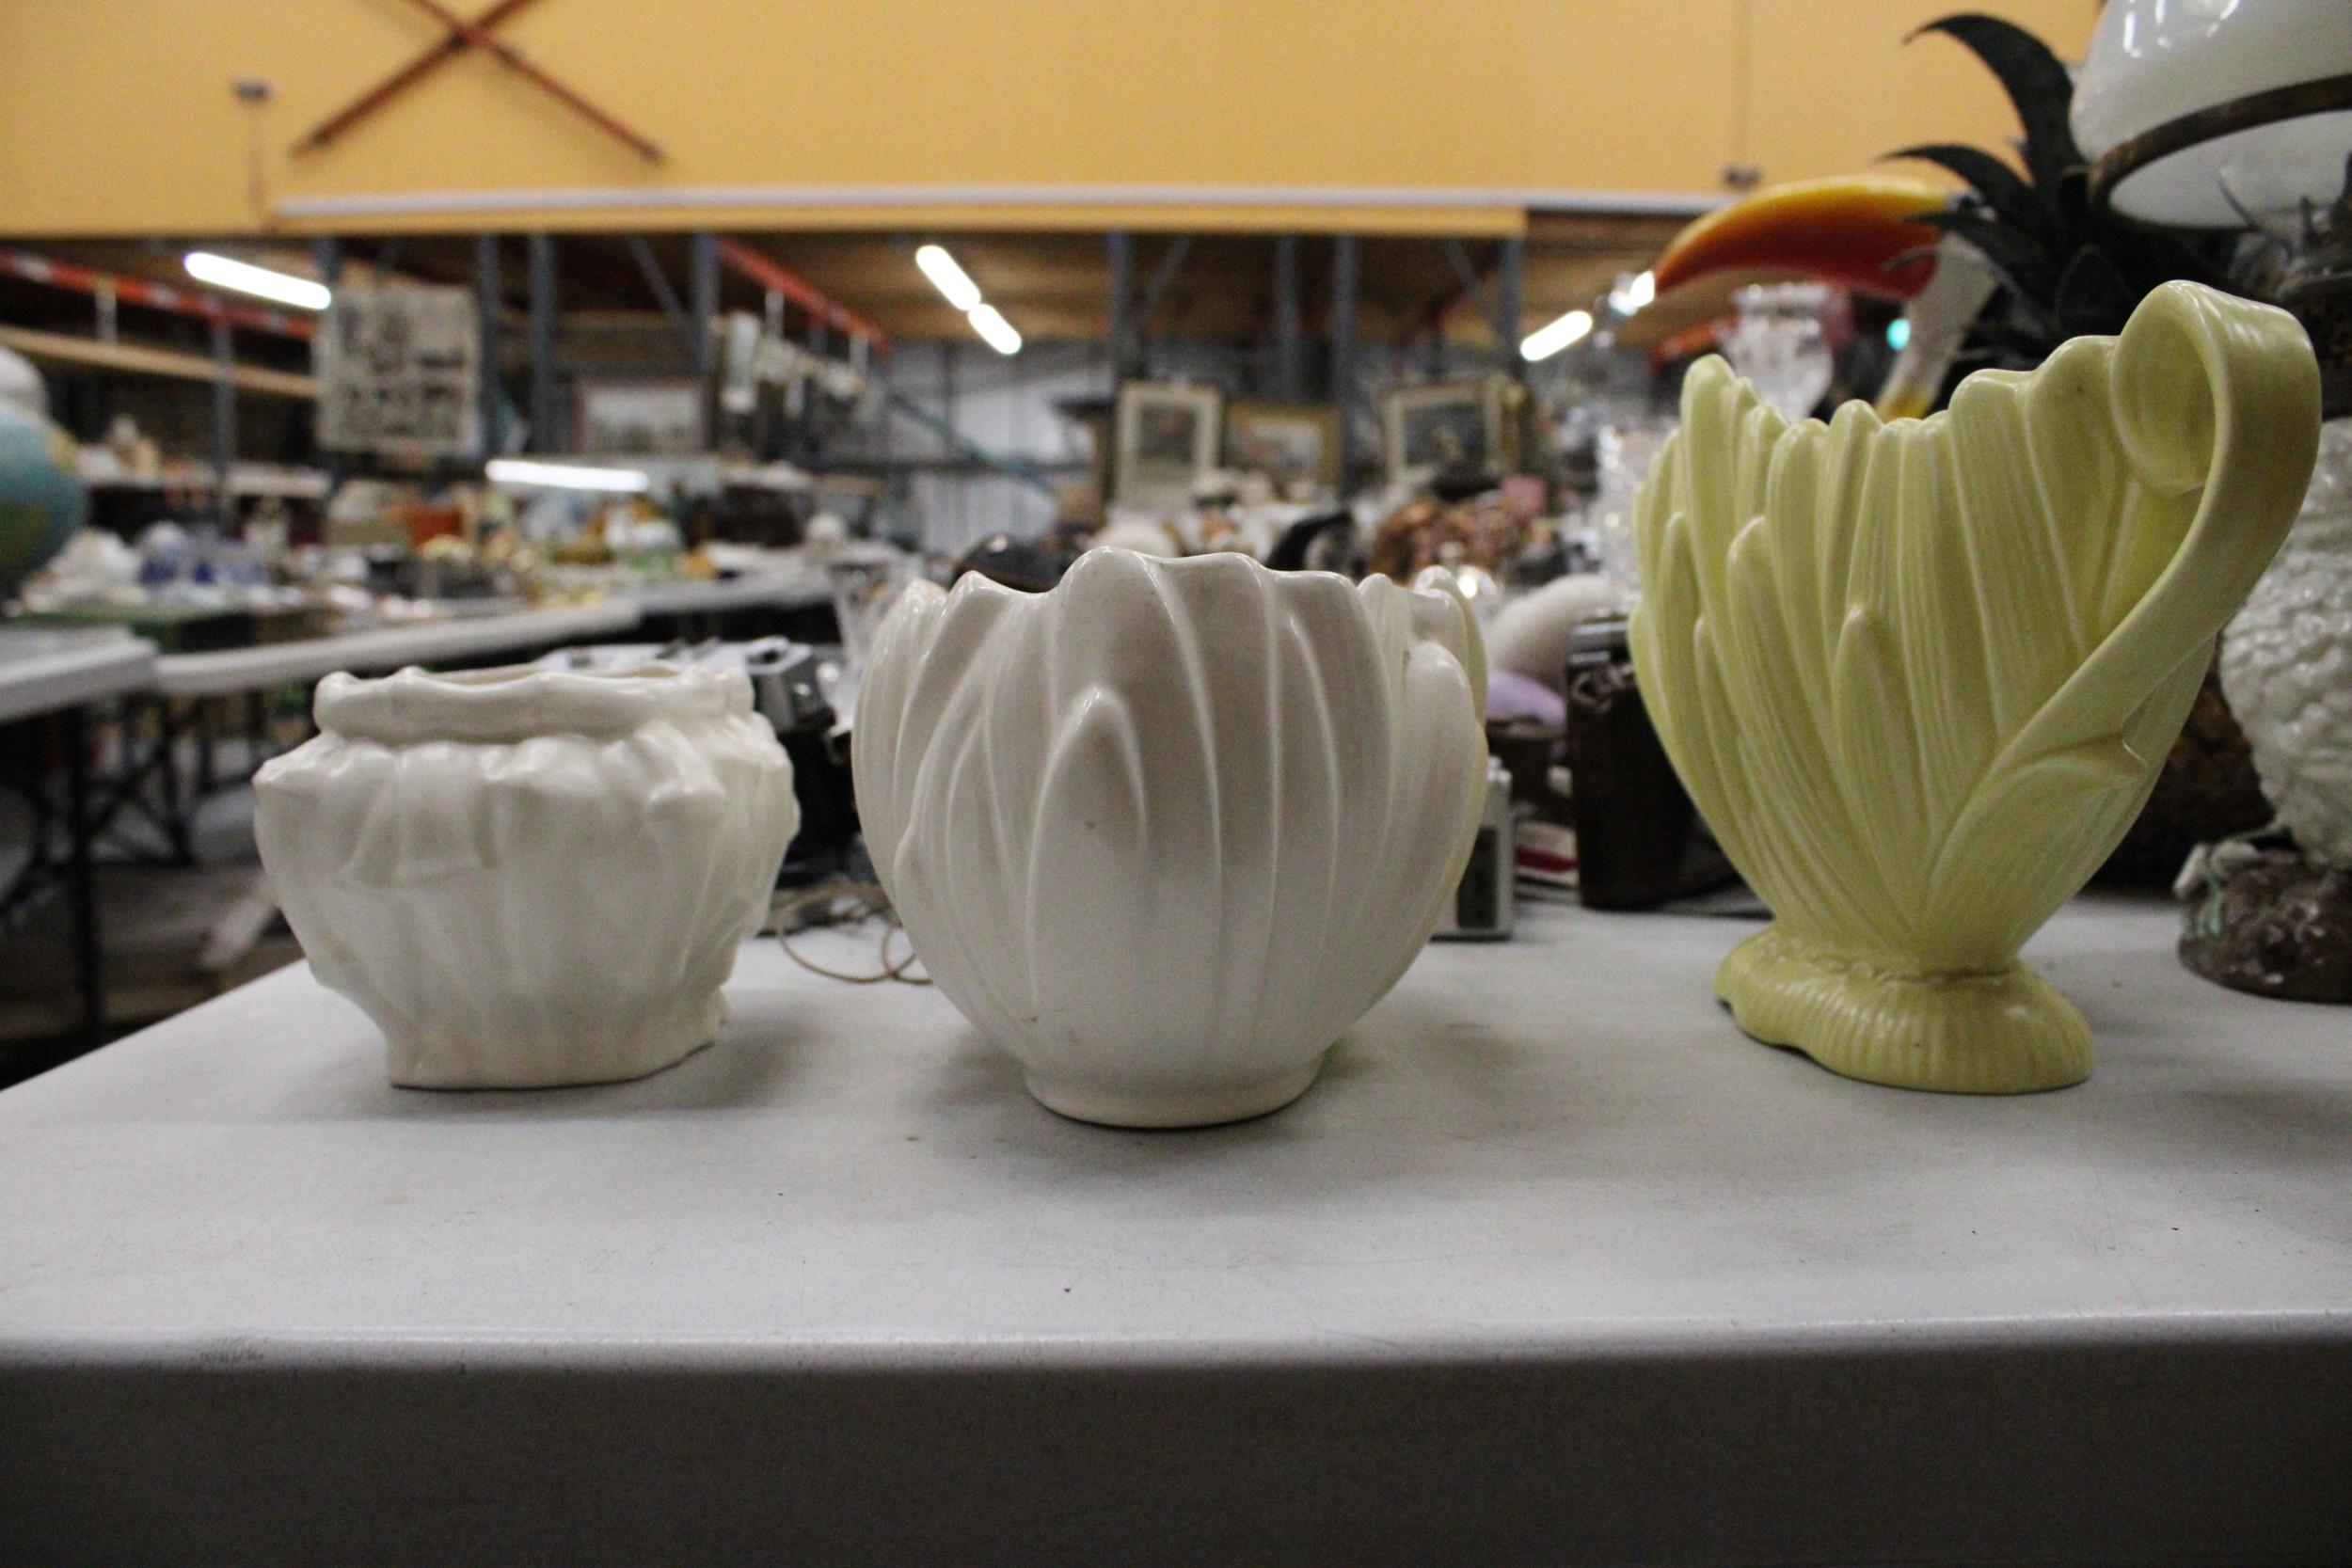 THREE VINTAGE SLYVAC PLANTERS TO INCLUDE PRIMROSE YELLOW - Image 5 of 6